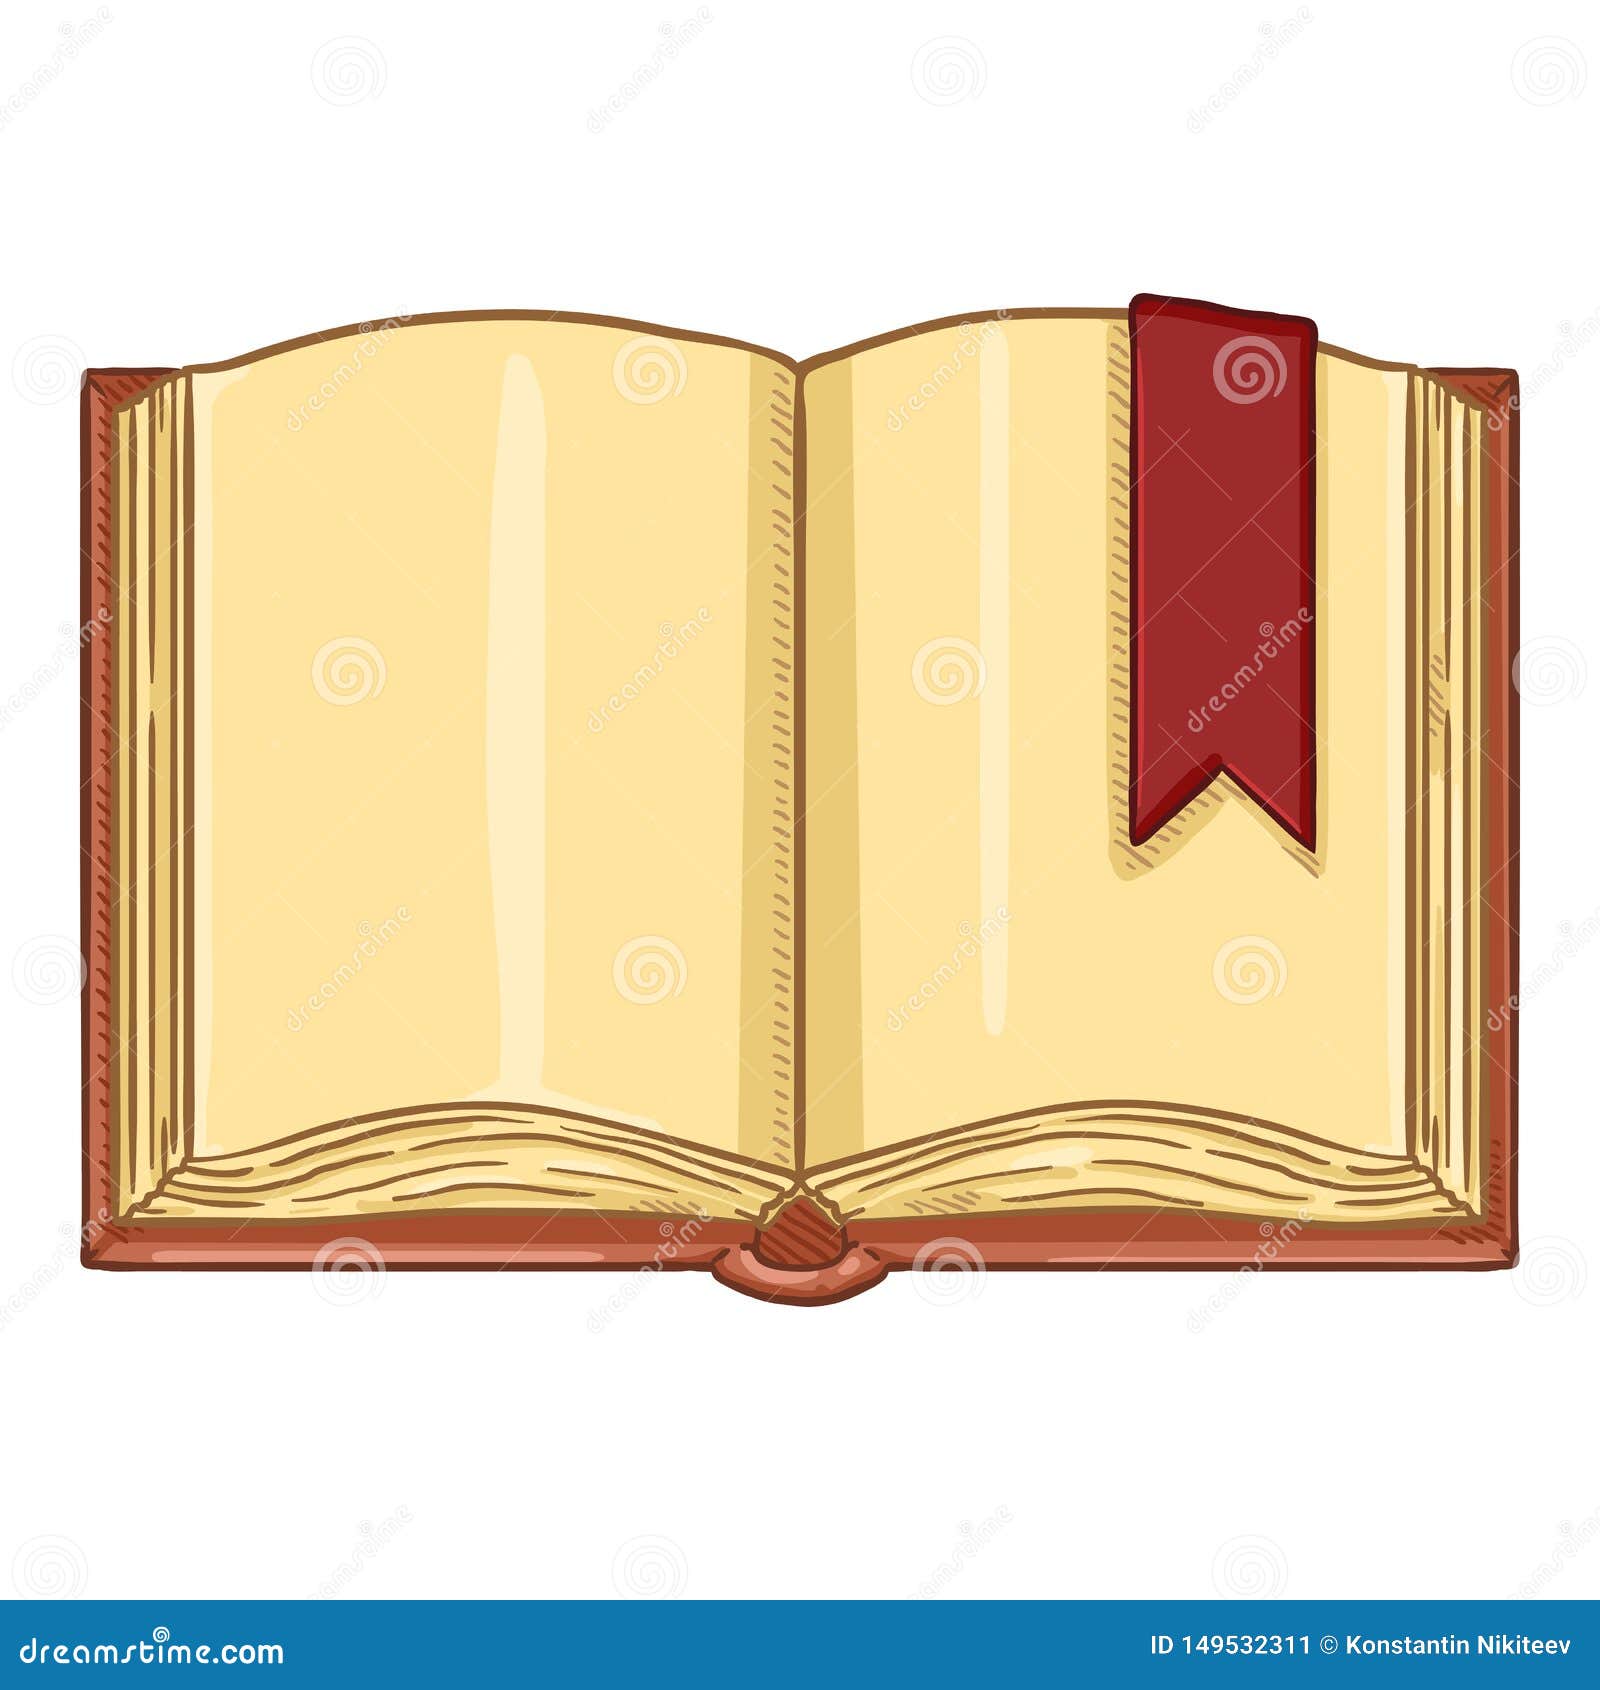 Sketch - open book with bookmark Royalty Free Vector Image